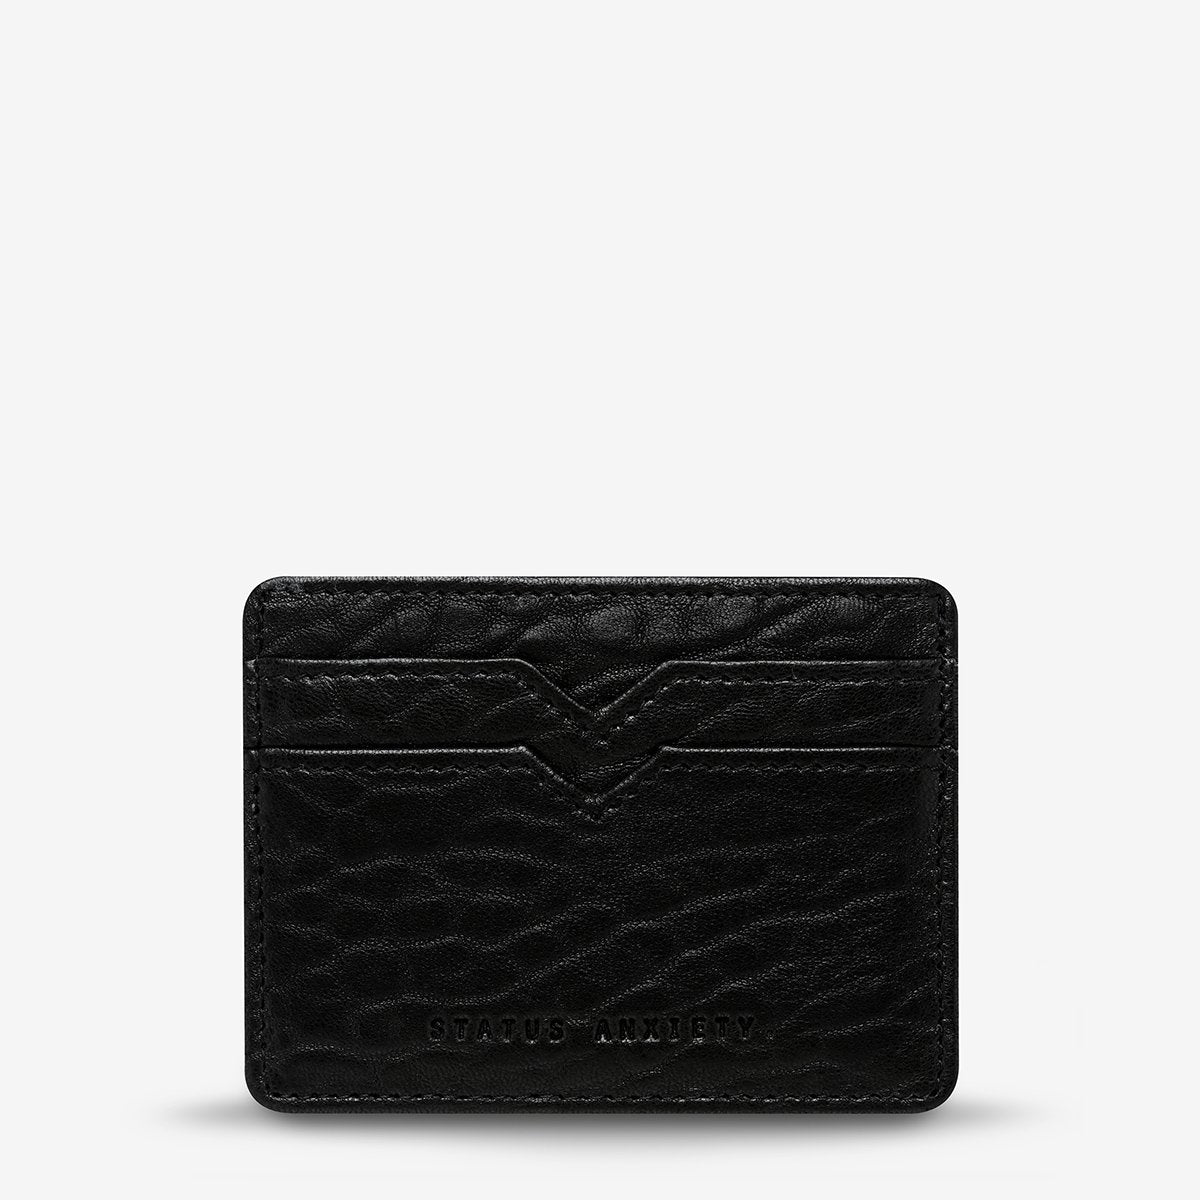 Status anxiety minimal card wallet black bubble leather 